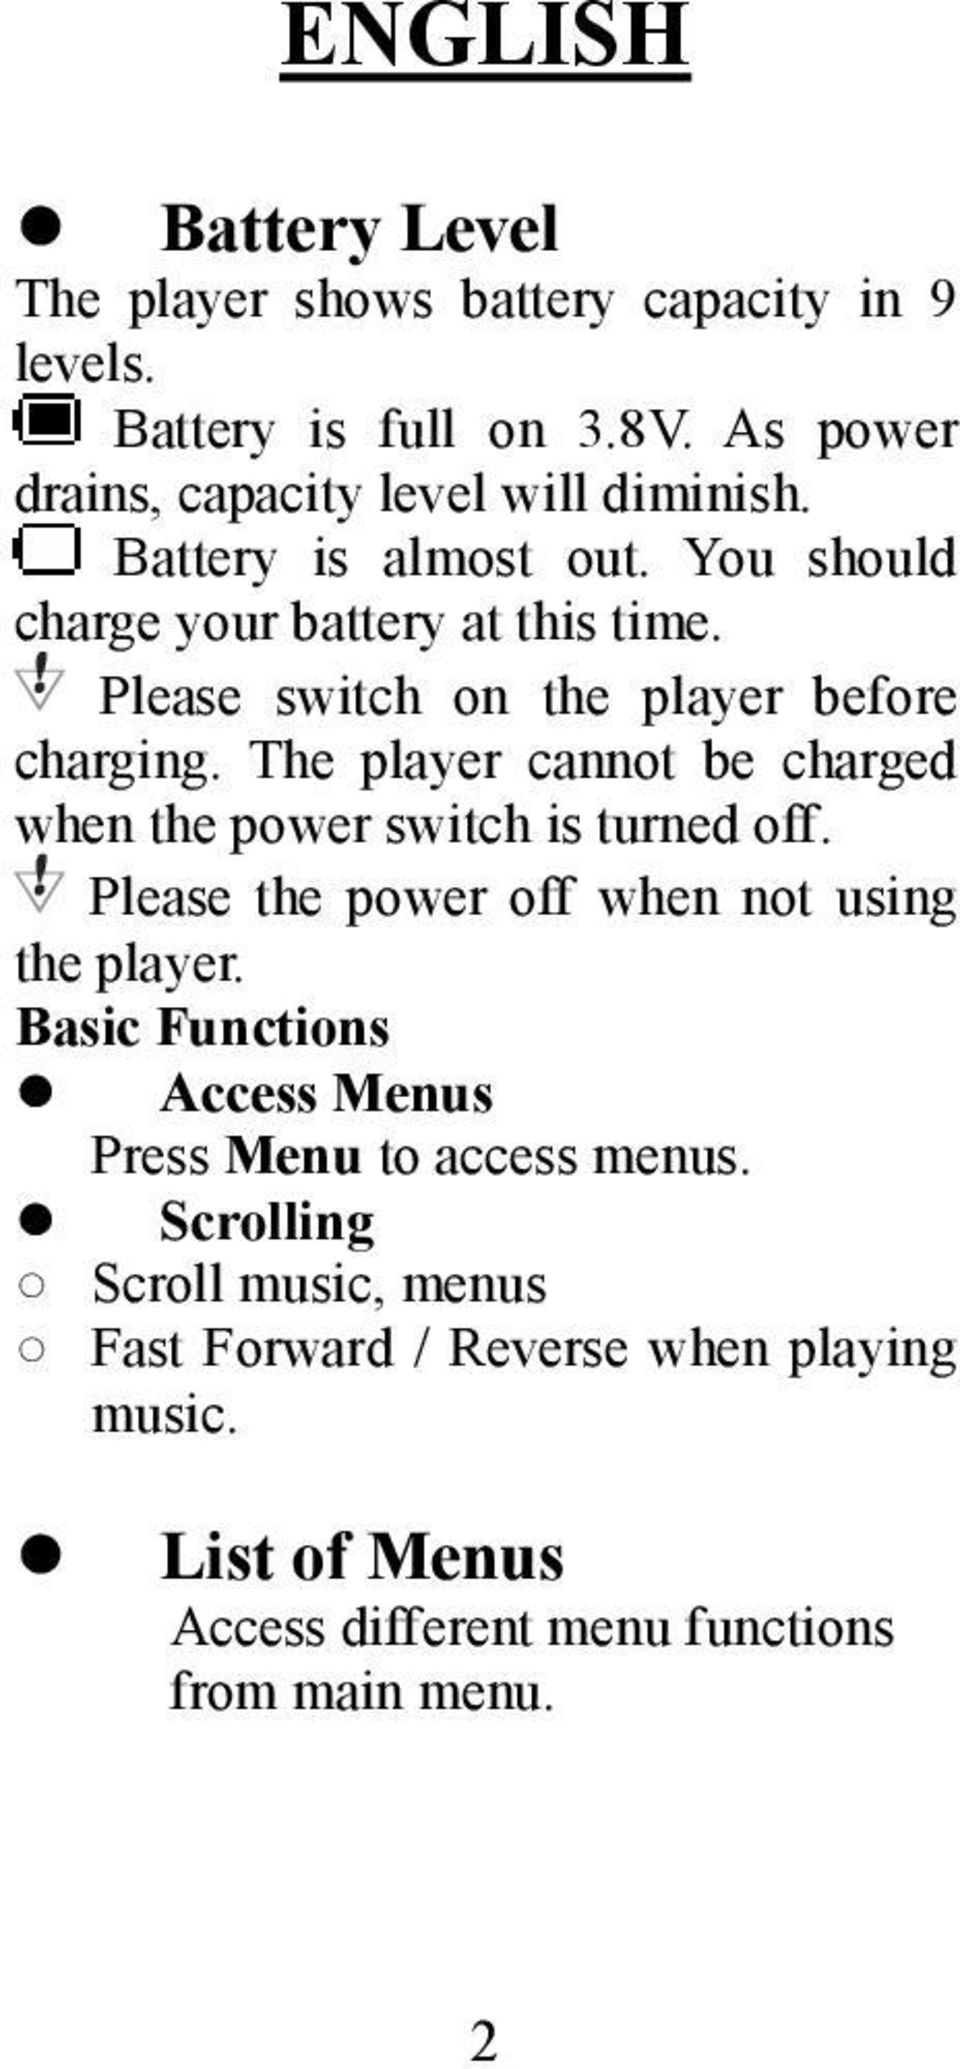 The player cannot be charged when the power switch is turned off. Please the power off when not using the player.